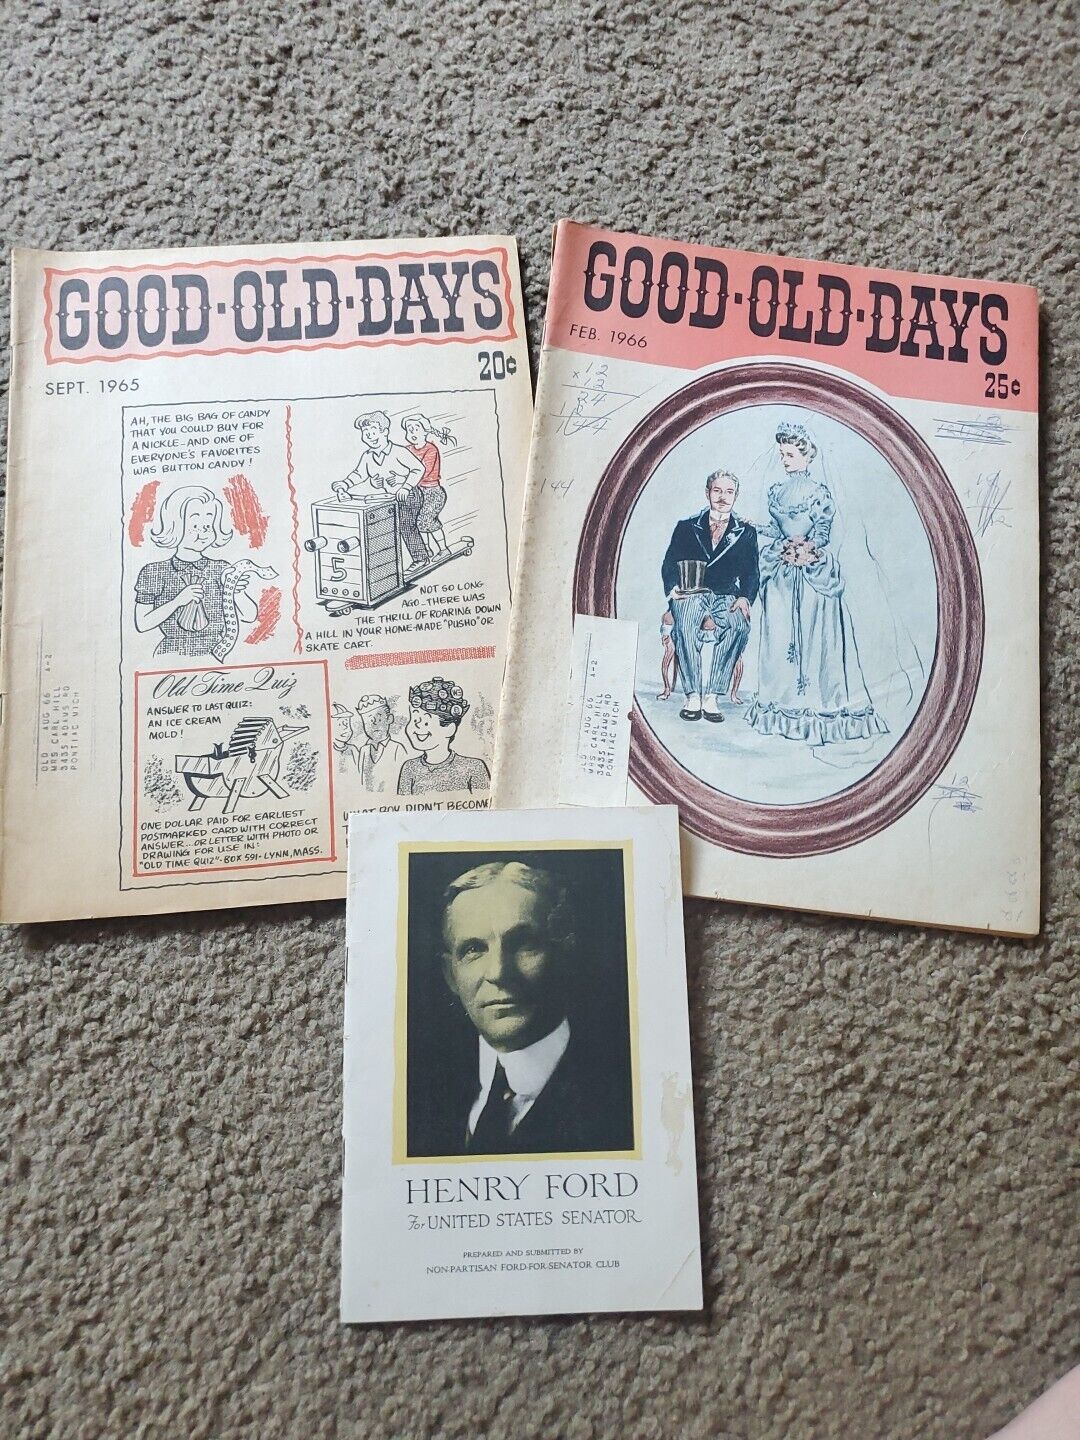 Good Old Days Magazine 1966 1965 Also Henry Ford Pamphlet